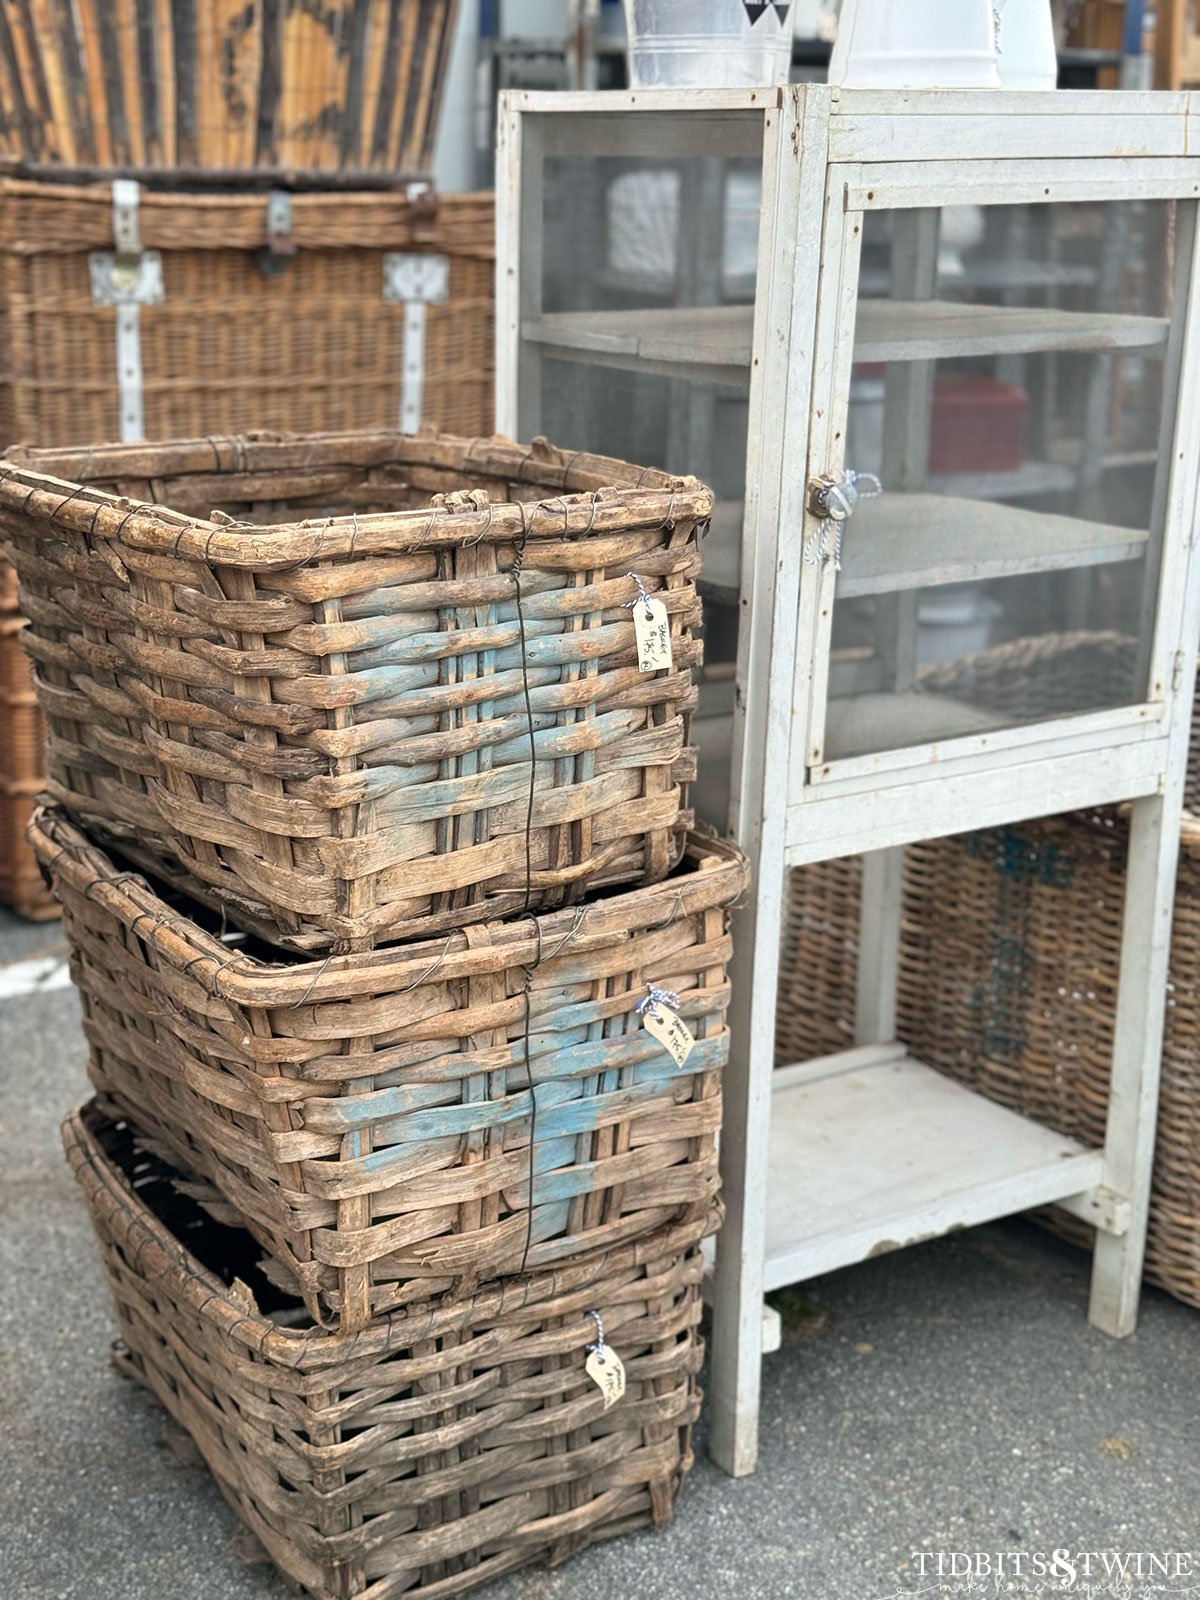 stack of antique french baskets with blue paint on the ends next to an antique medicine cabinet at an antique fair